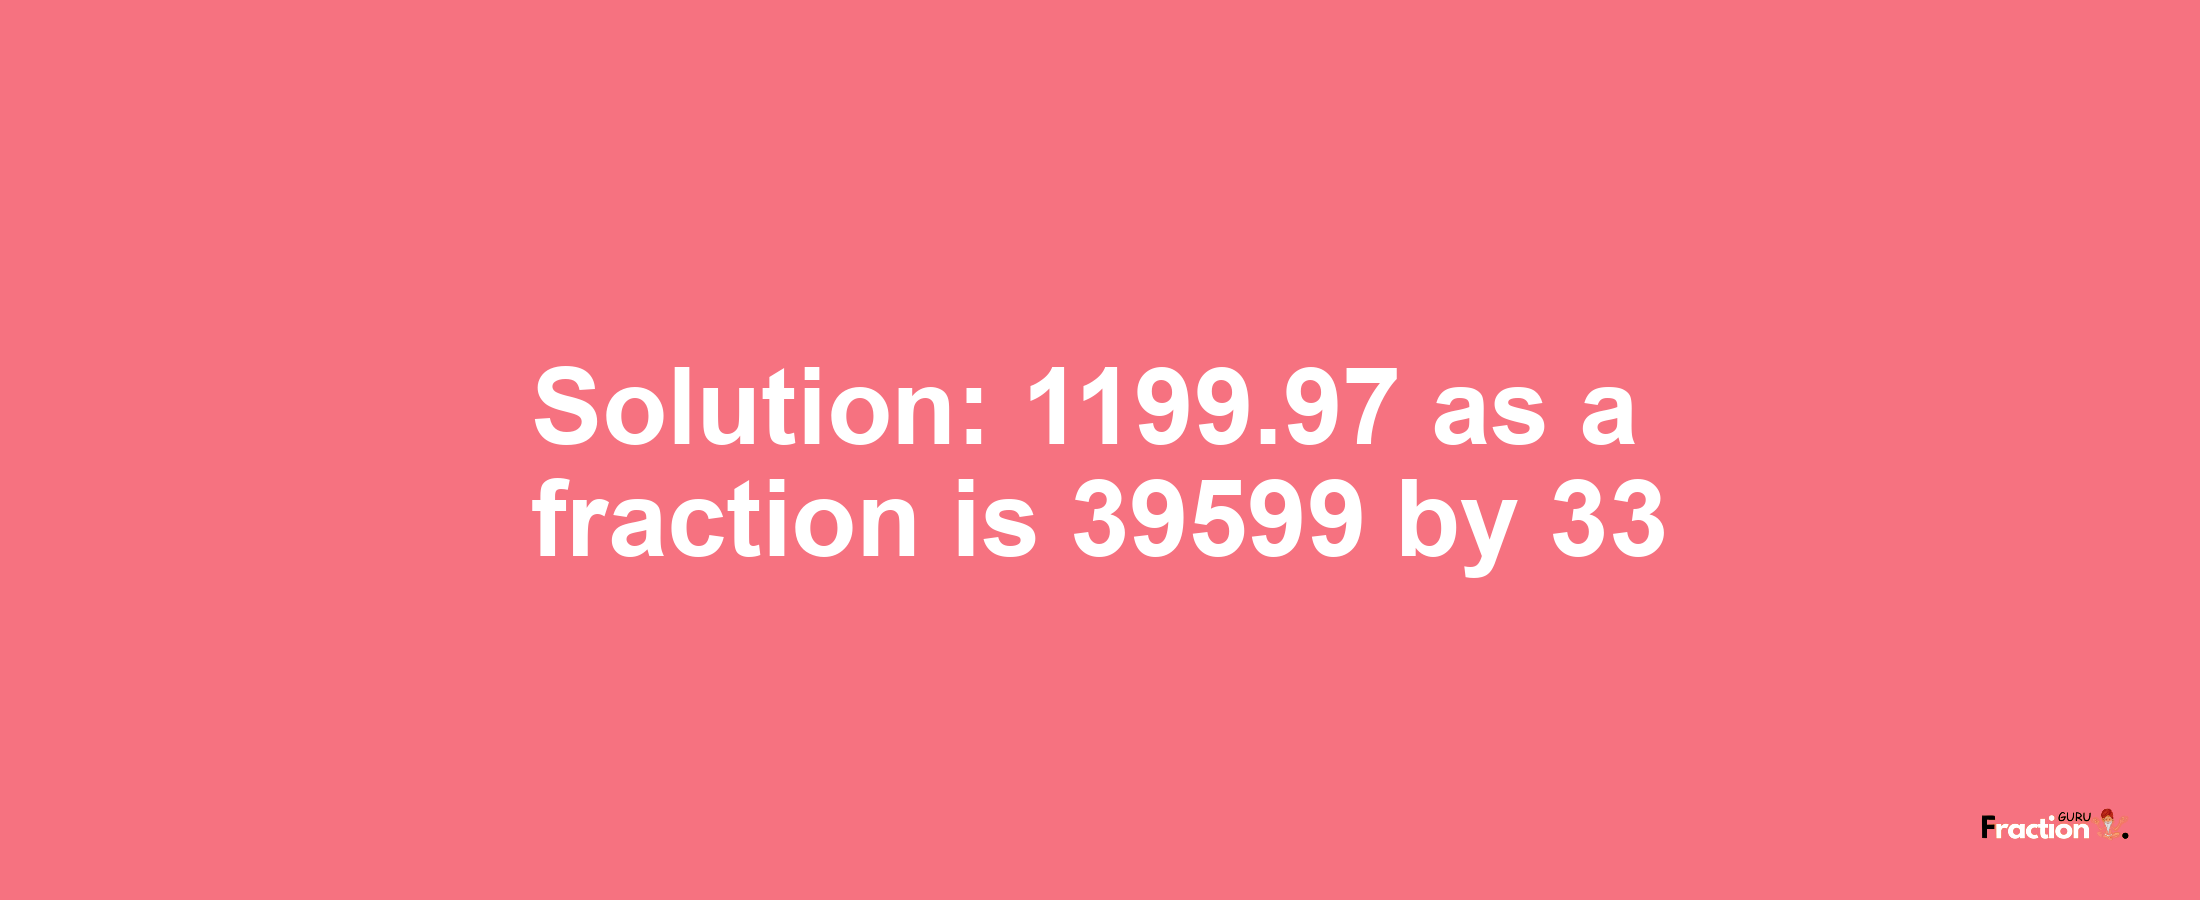 Solution:1199.97 as a fraction is 39599/33